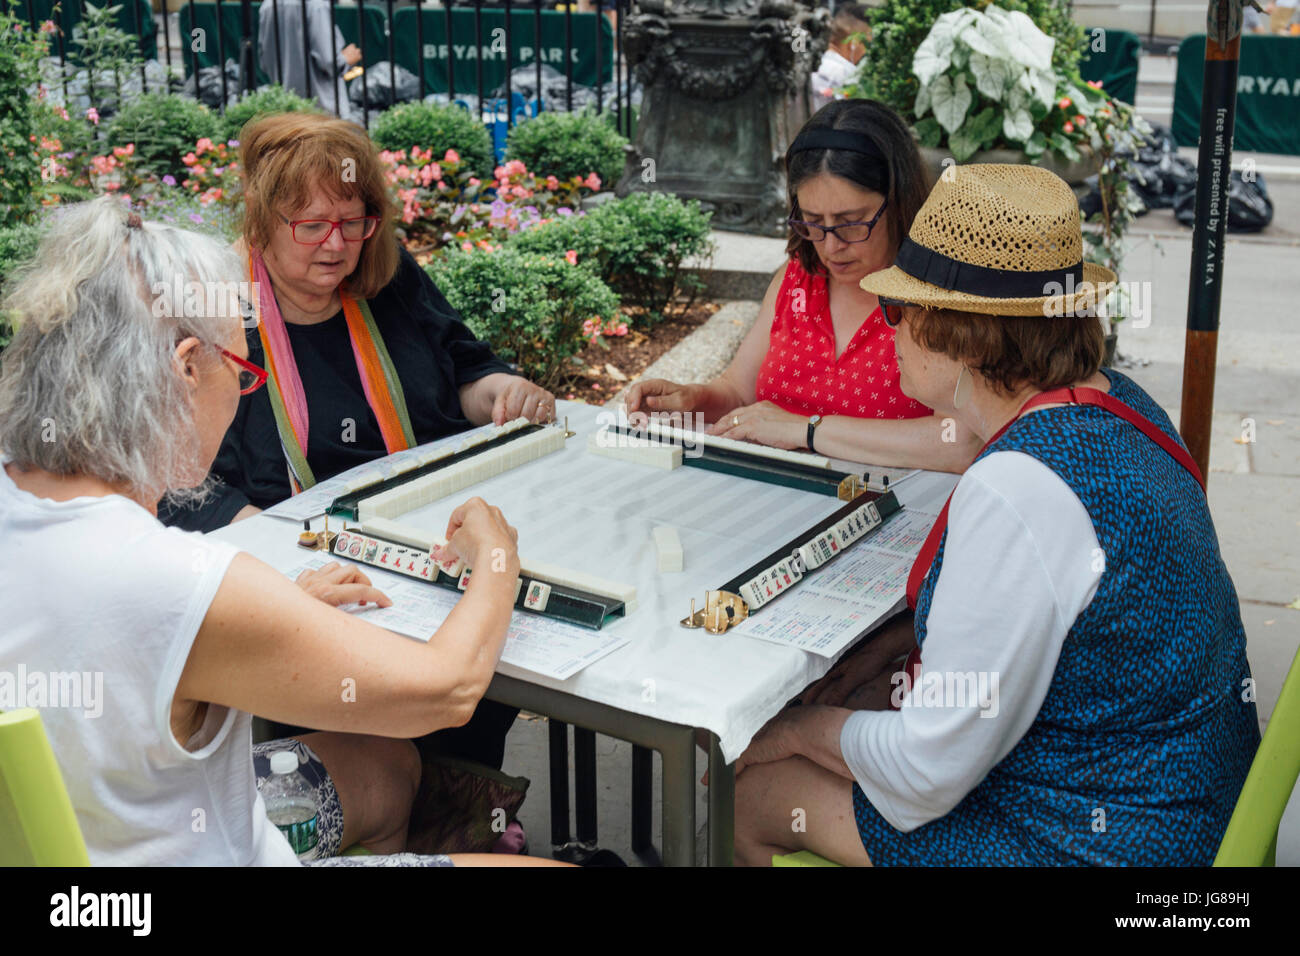 New York, USA. 3rd July, 2017. Hobbyists play Mah Jongg during the 'Mah Jongg Marathon' event at Bryant Park in New York City, the United States, on July 3, 2017. According to event organizer Linda Fisher, the event is organized to provide a place for Mah Jongg hobbyists to communicate with each other and promote the game to more people. Mah Jongg, originated from China, was introduced to the United States in the 1920s. Credit: Xu Keshuang/Xinhua/Alamy Live News Stock Photo